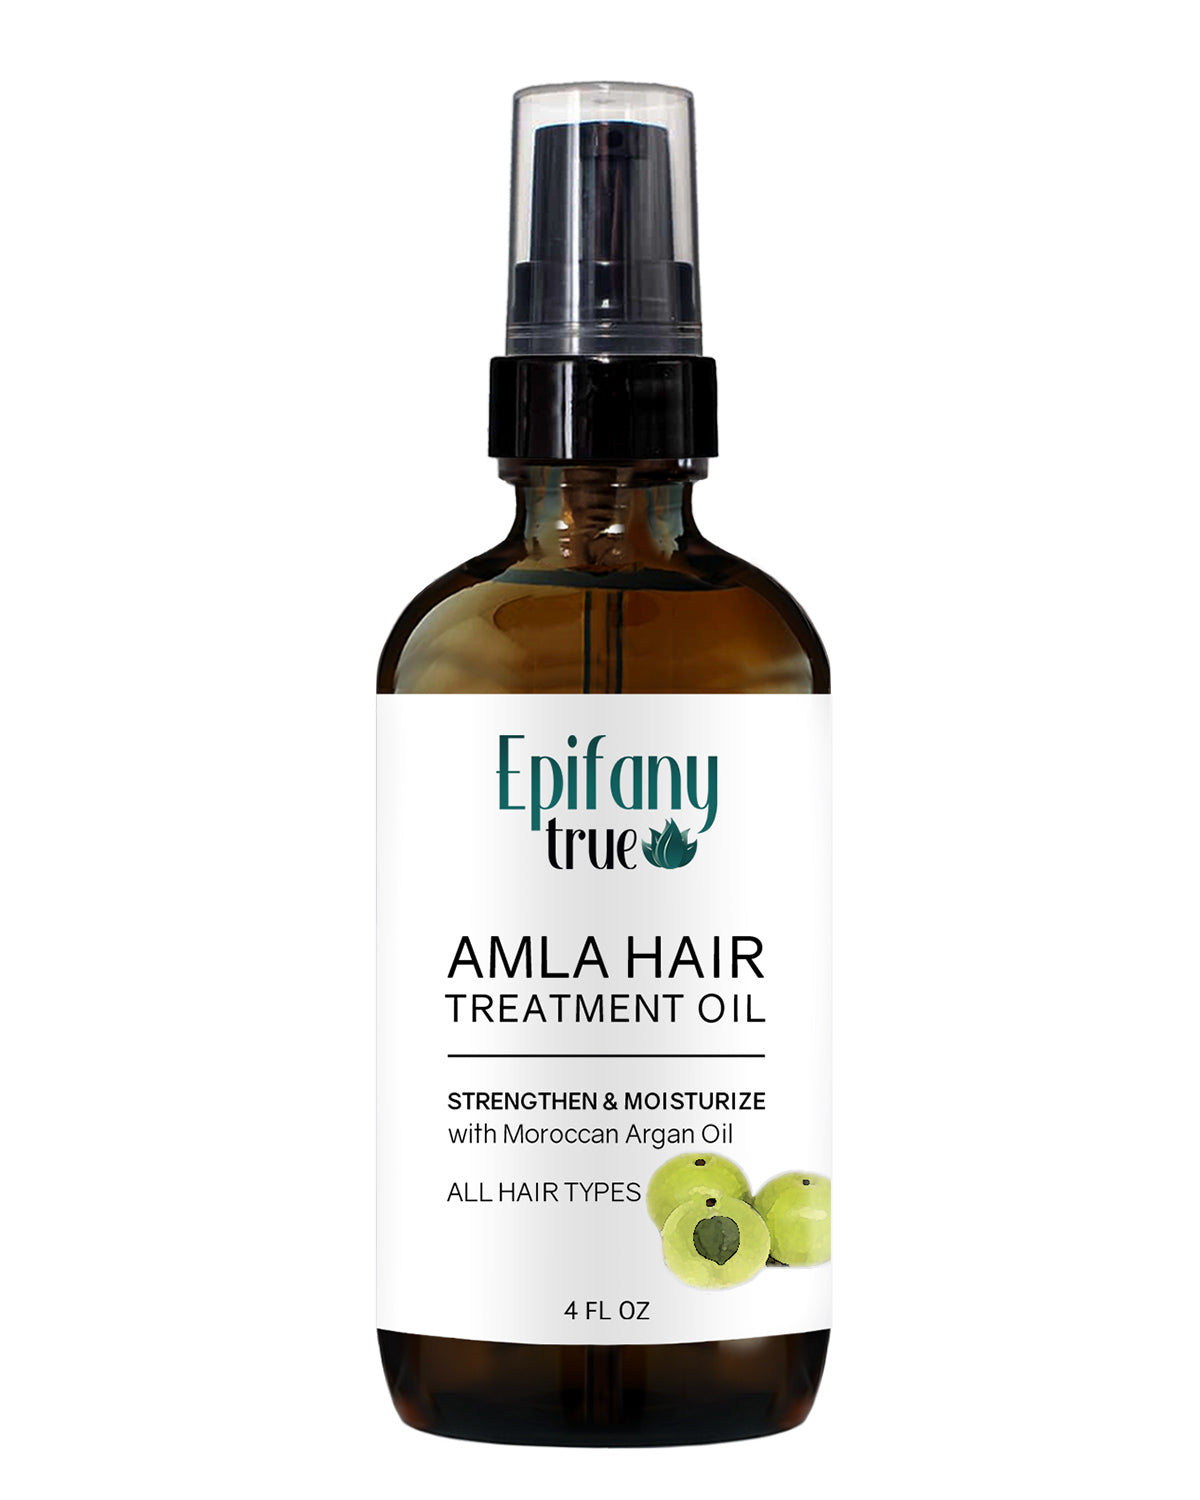 Epifany True Amla Hair Treatment Oil 4oz to strengthen and moisturize